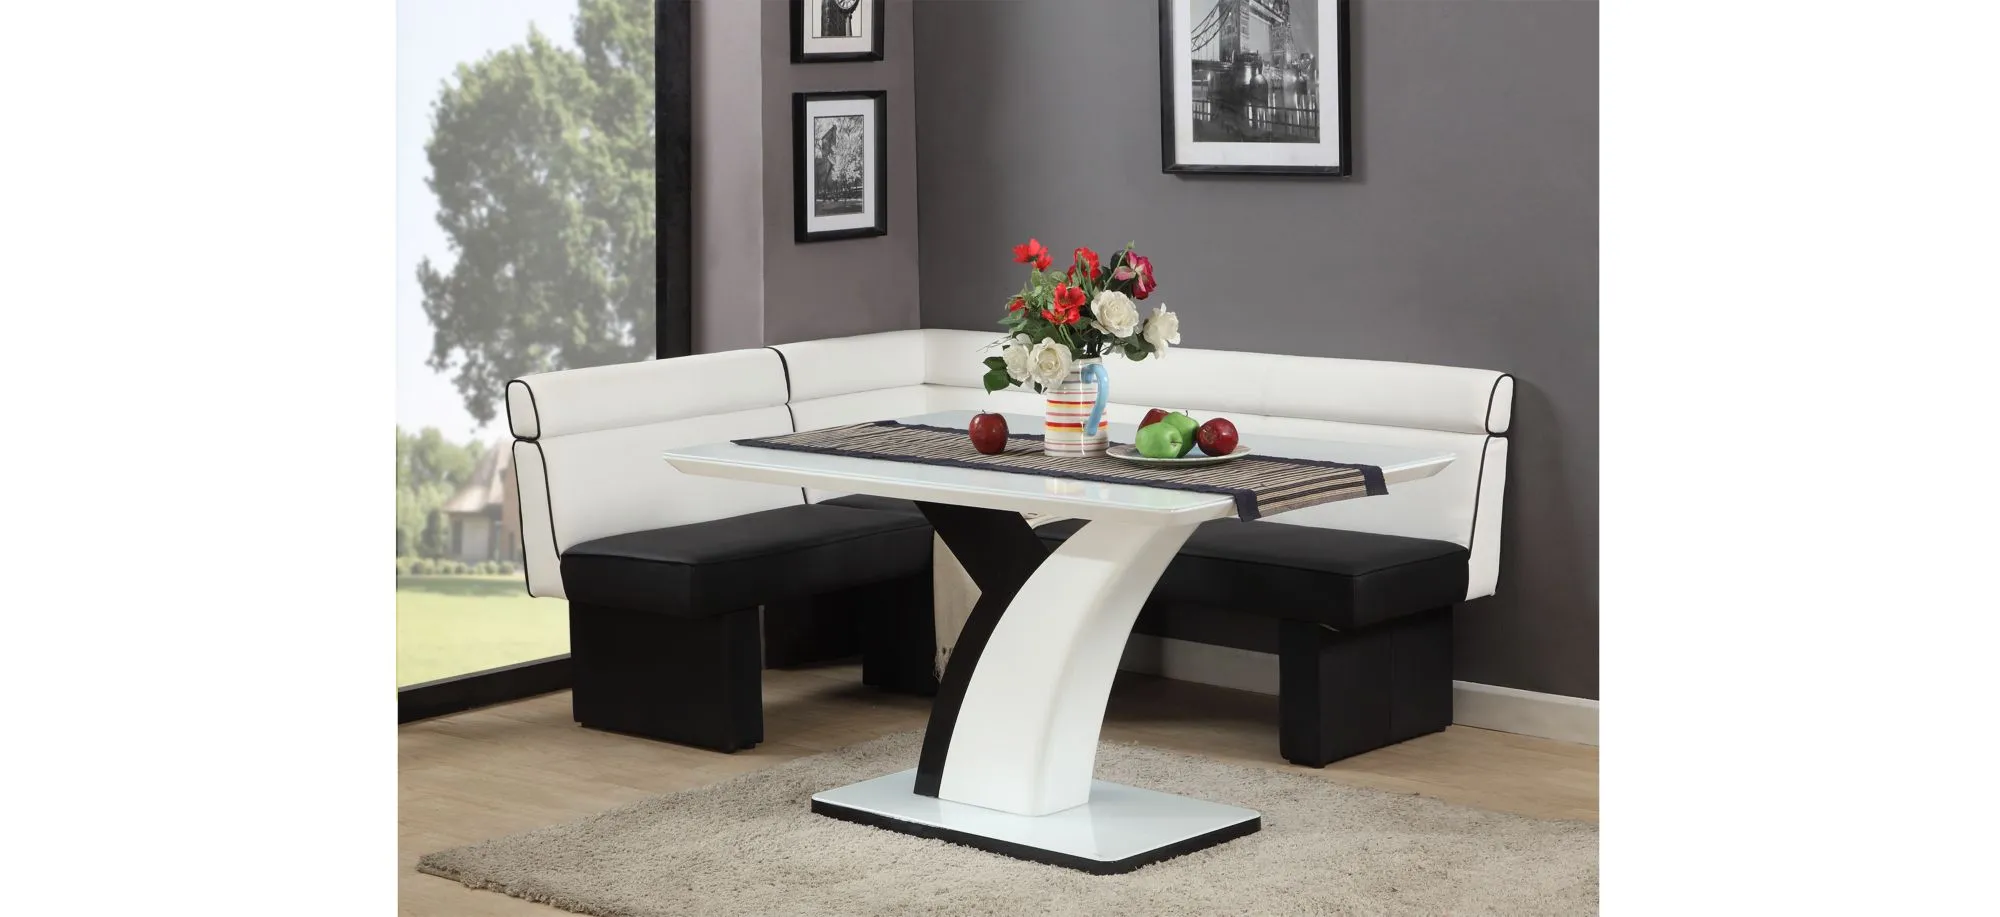 Natasha 3-pc. Breakfast Nook Dining Set in White / Black by Chintaly Imports